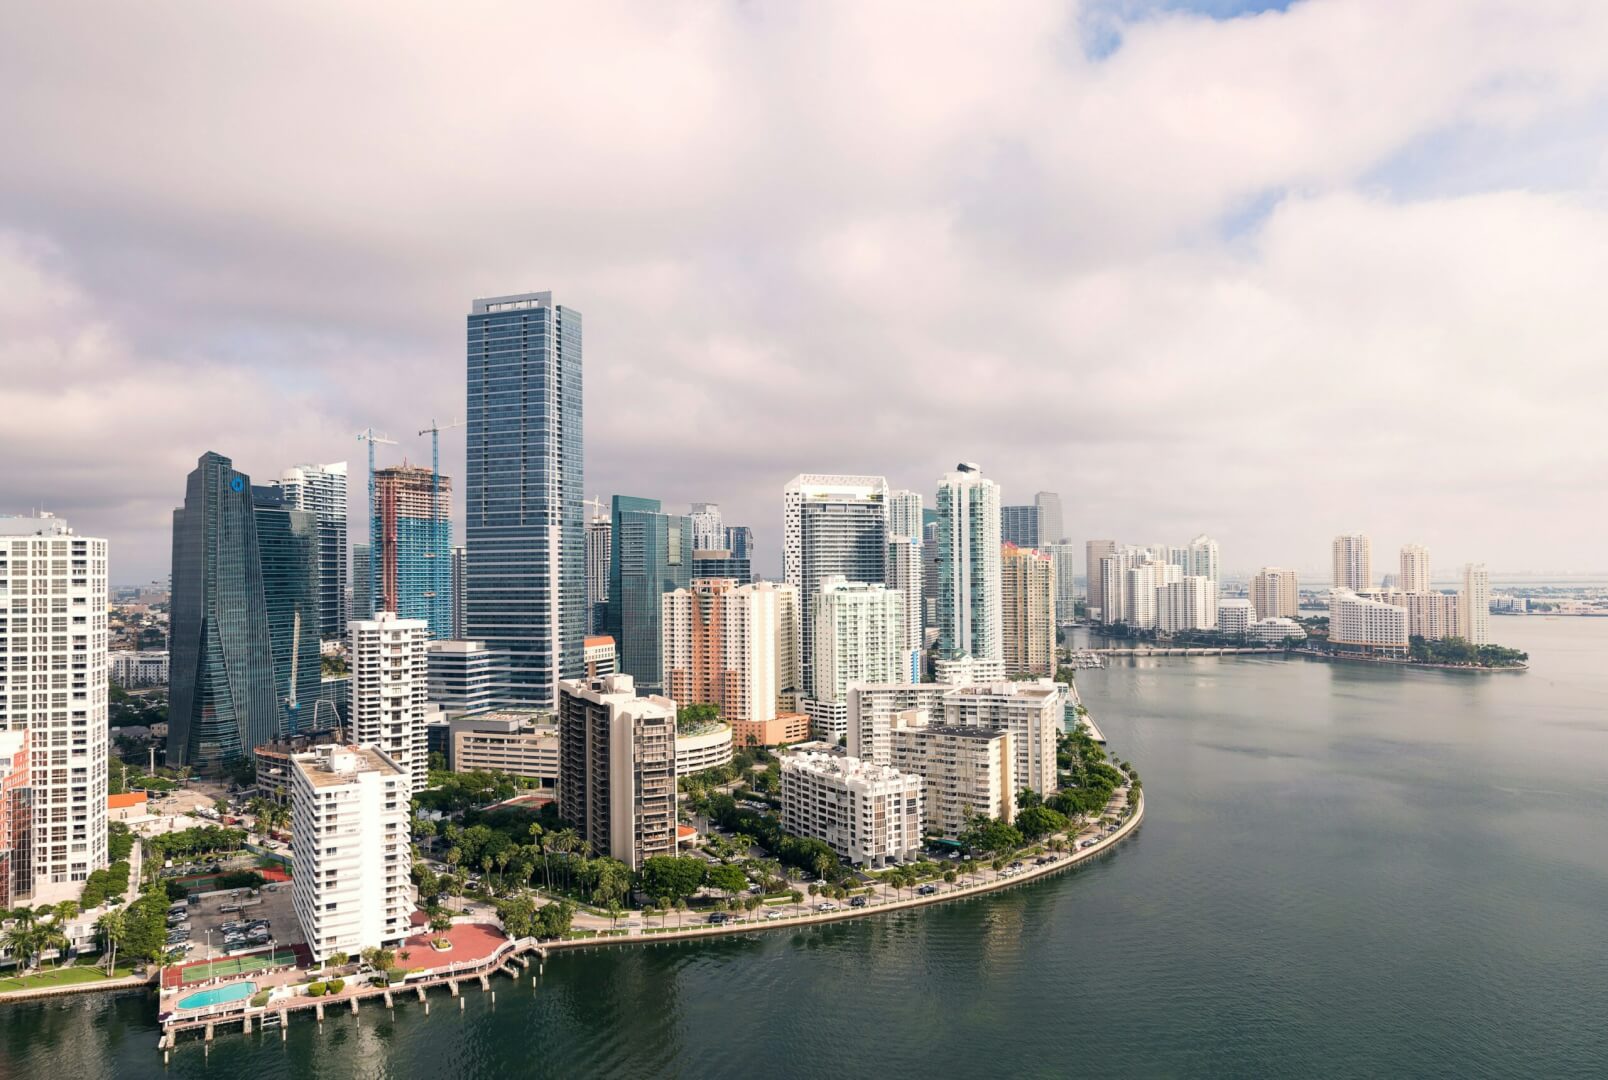 Miami - a city with a bustling startup scene